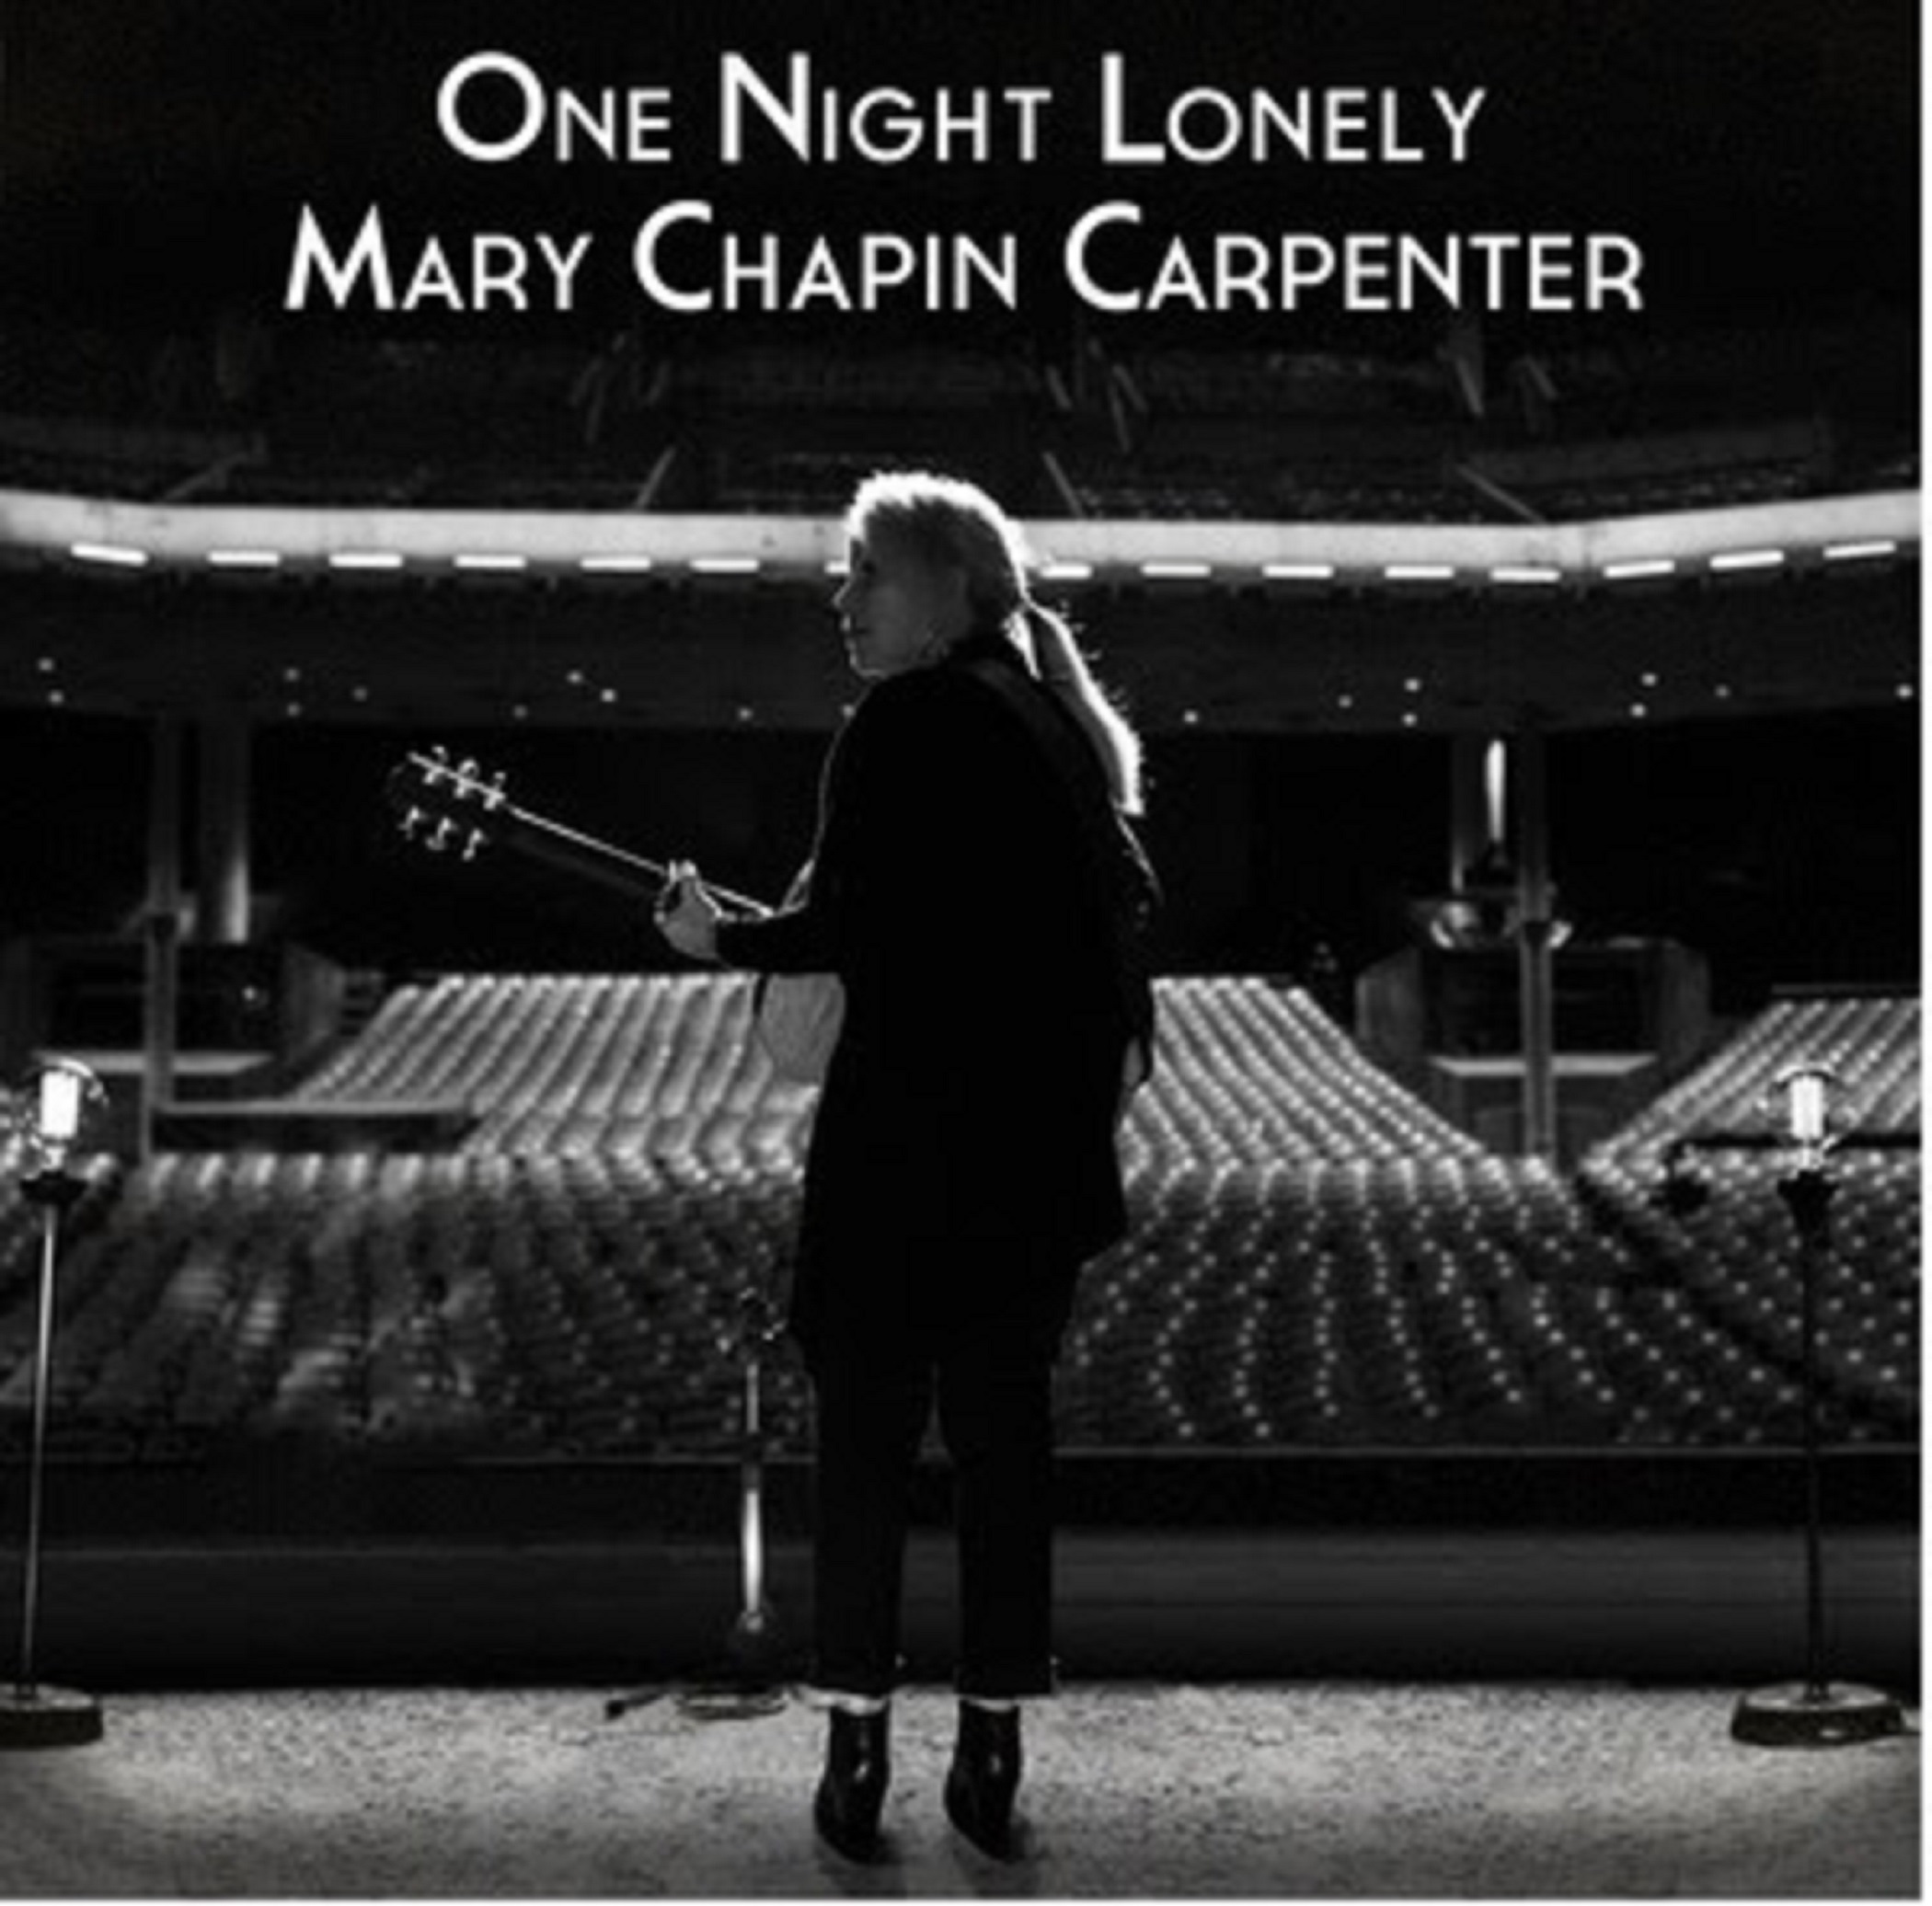 Mary Chapin Carpenter nominated for Best Folk Album at 64th GRAMMY Awards